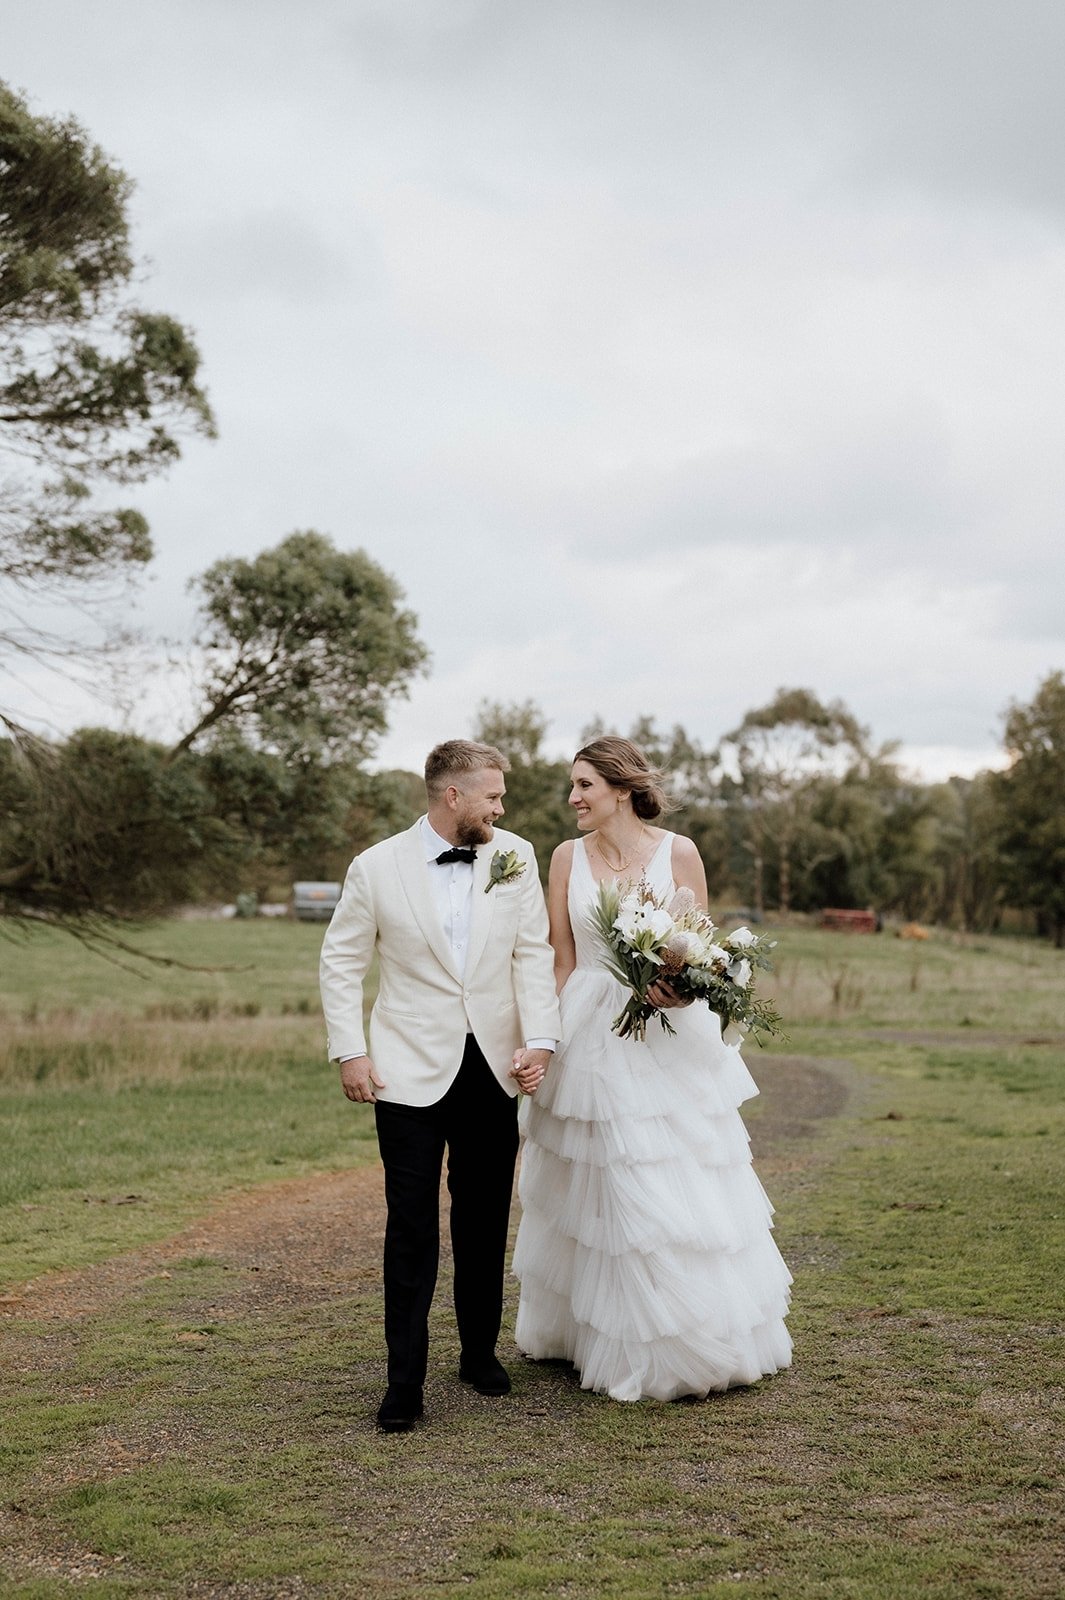 Sorcha &amp; James 💍
⠀⠀⠀⠀⠀⠀⠀
⠀⠀
We love seeing couples exploring the beautiful grounds of Waldara in their first moments as newlyweds 🌾

Captured by @onajanzenweddings